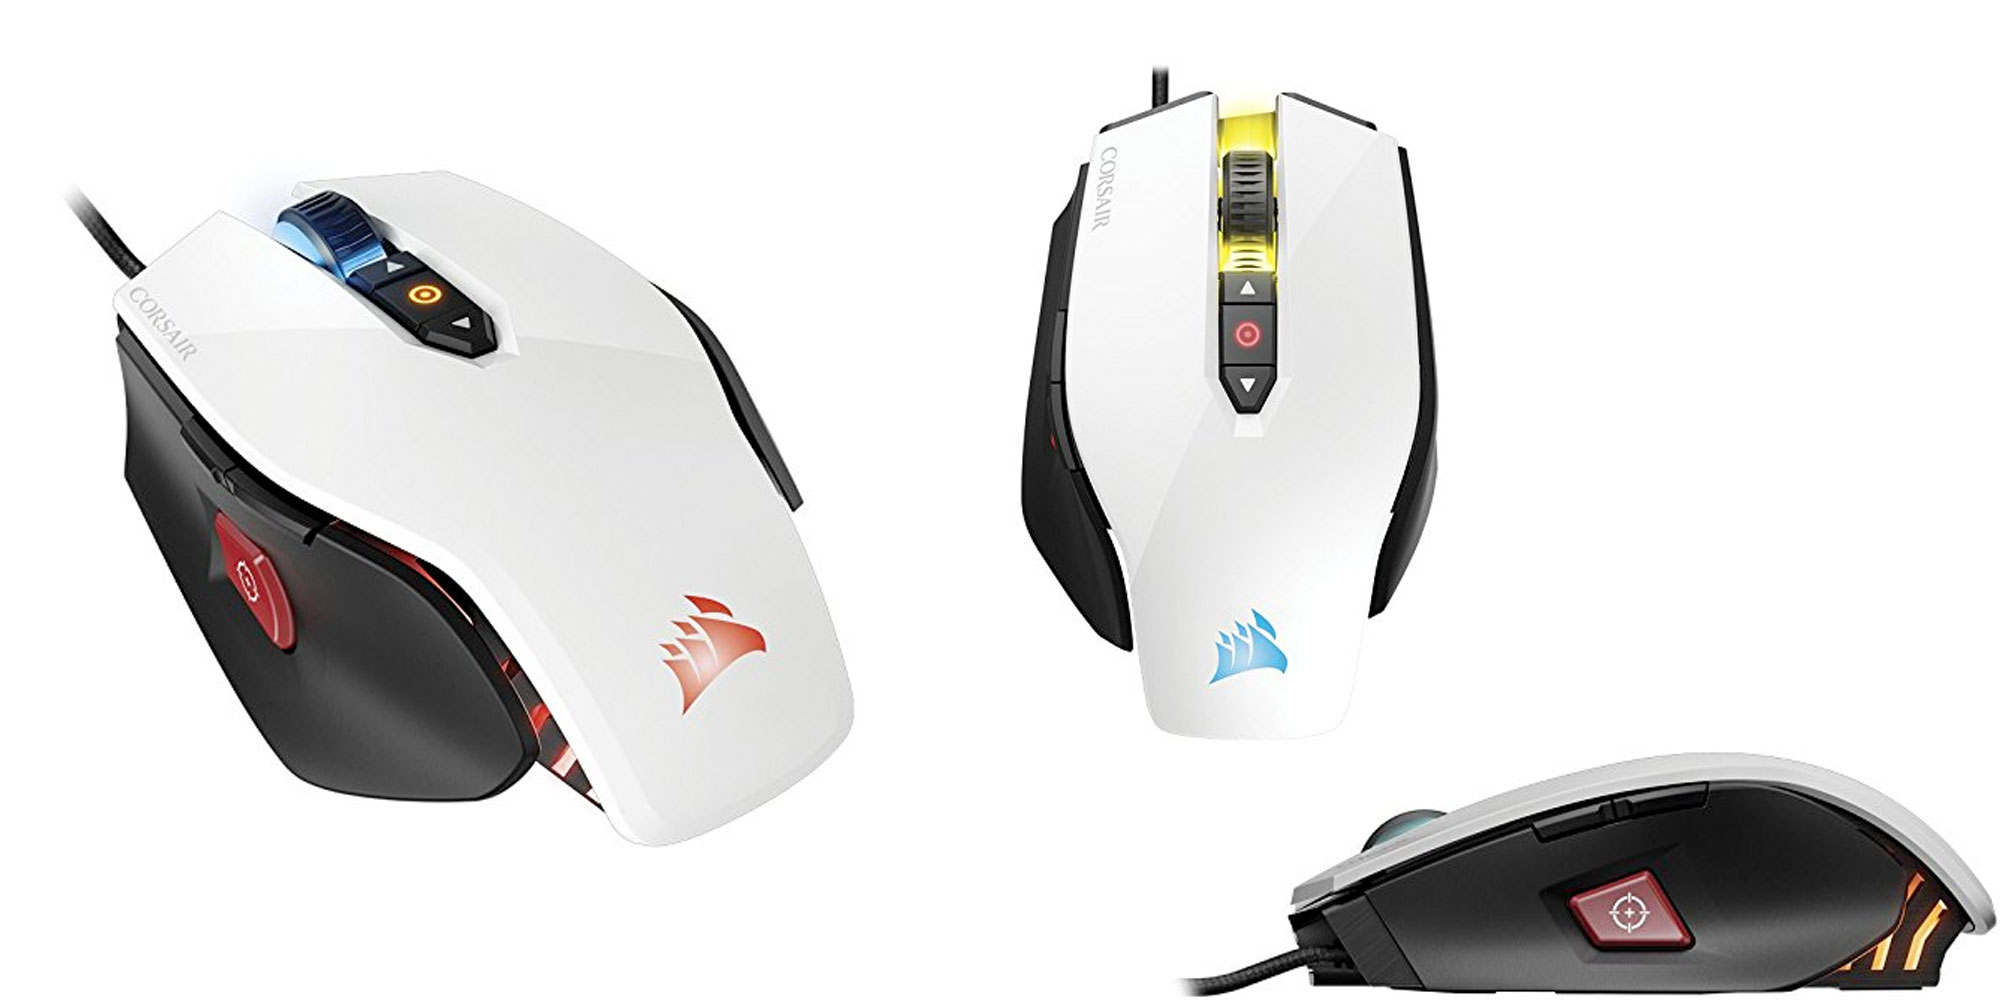 CORSAIR's Pro RGB Gaming Mouse drops $40 shipped, more from $59